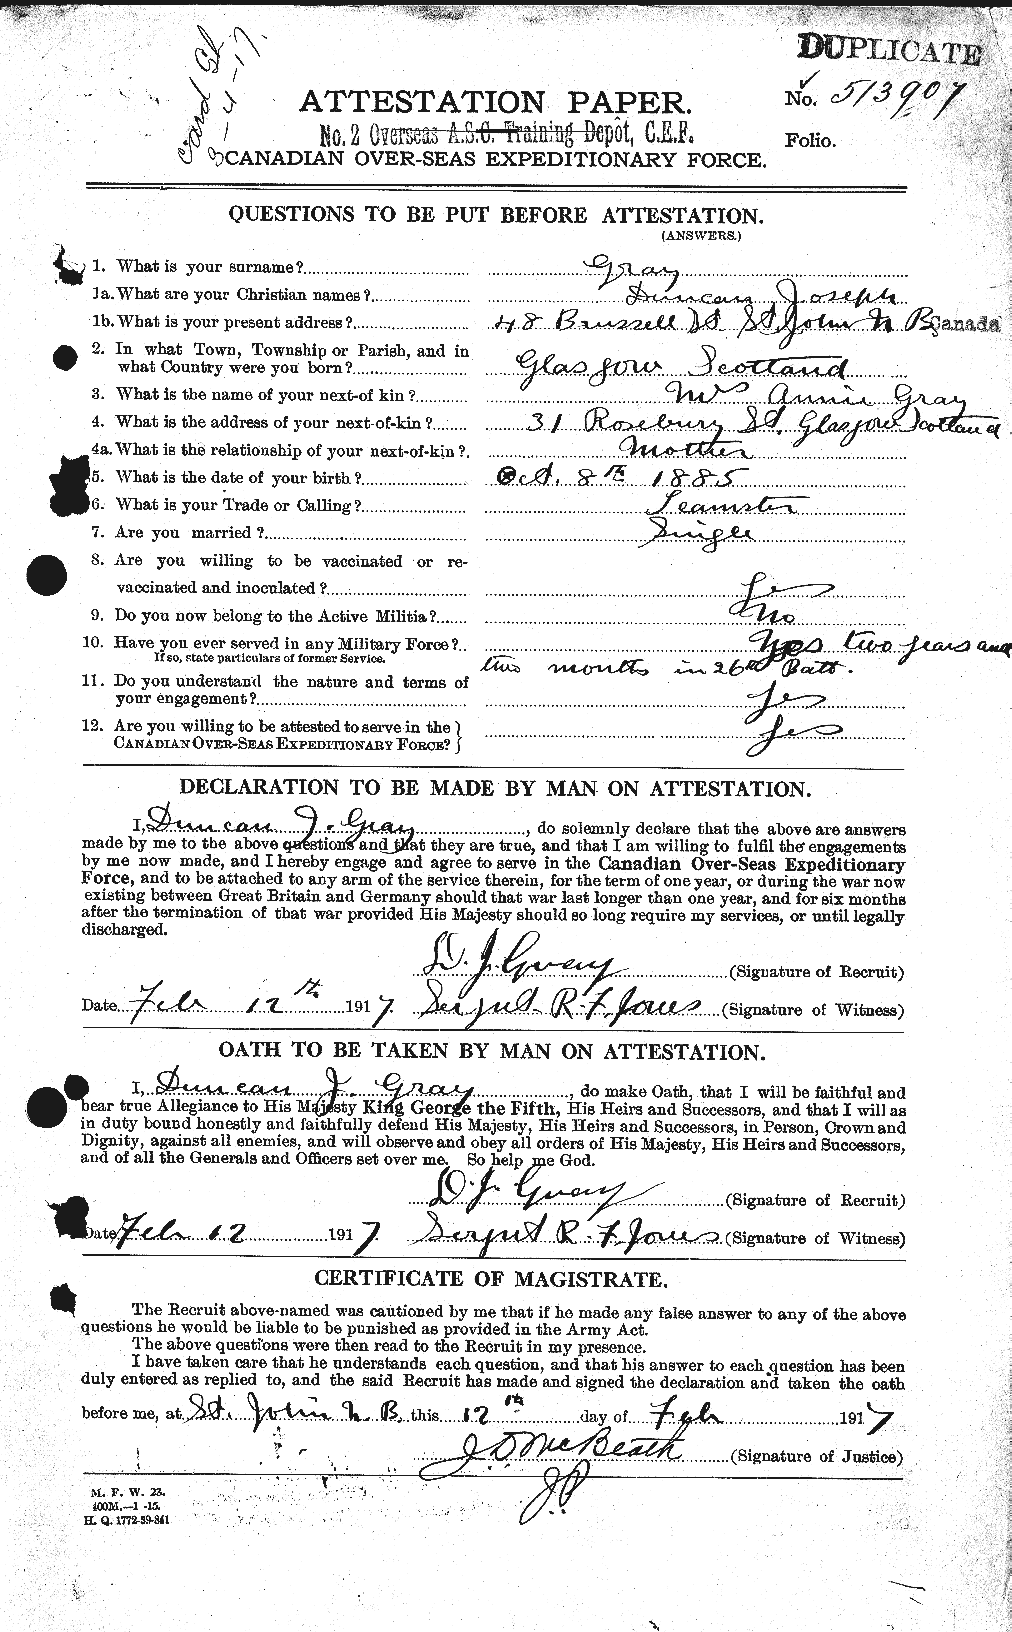 Personnel Records of the First World War - CEF 361491a